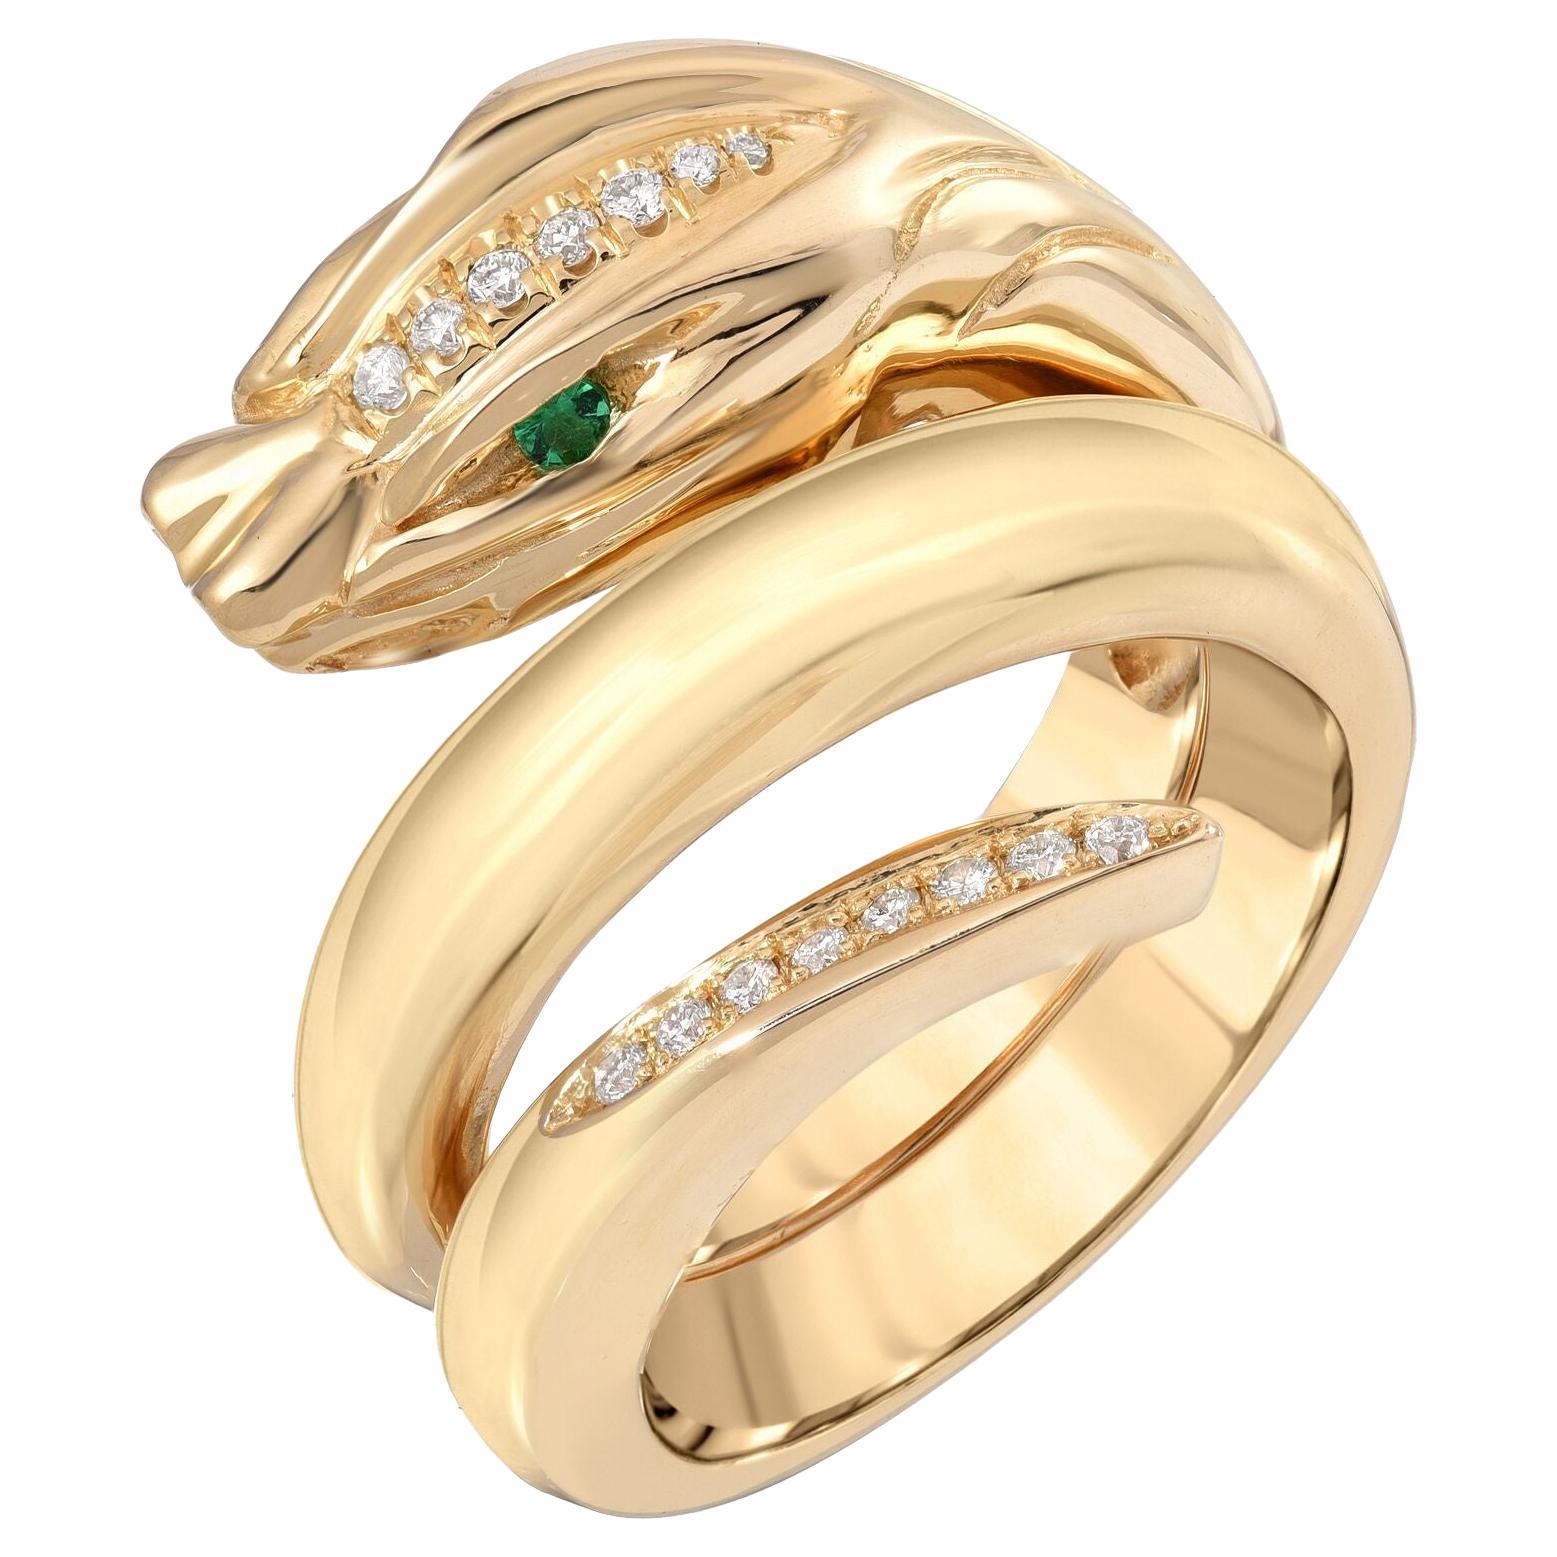 For Sale:  House of RAVN, 14k Gold Serpent Ring with Emerald Eyes & Diamond Crown & Tail